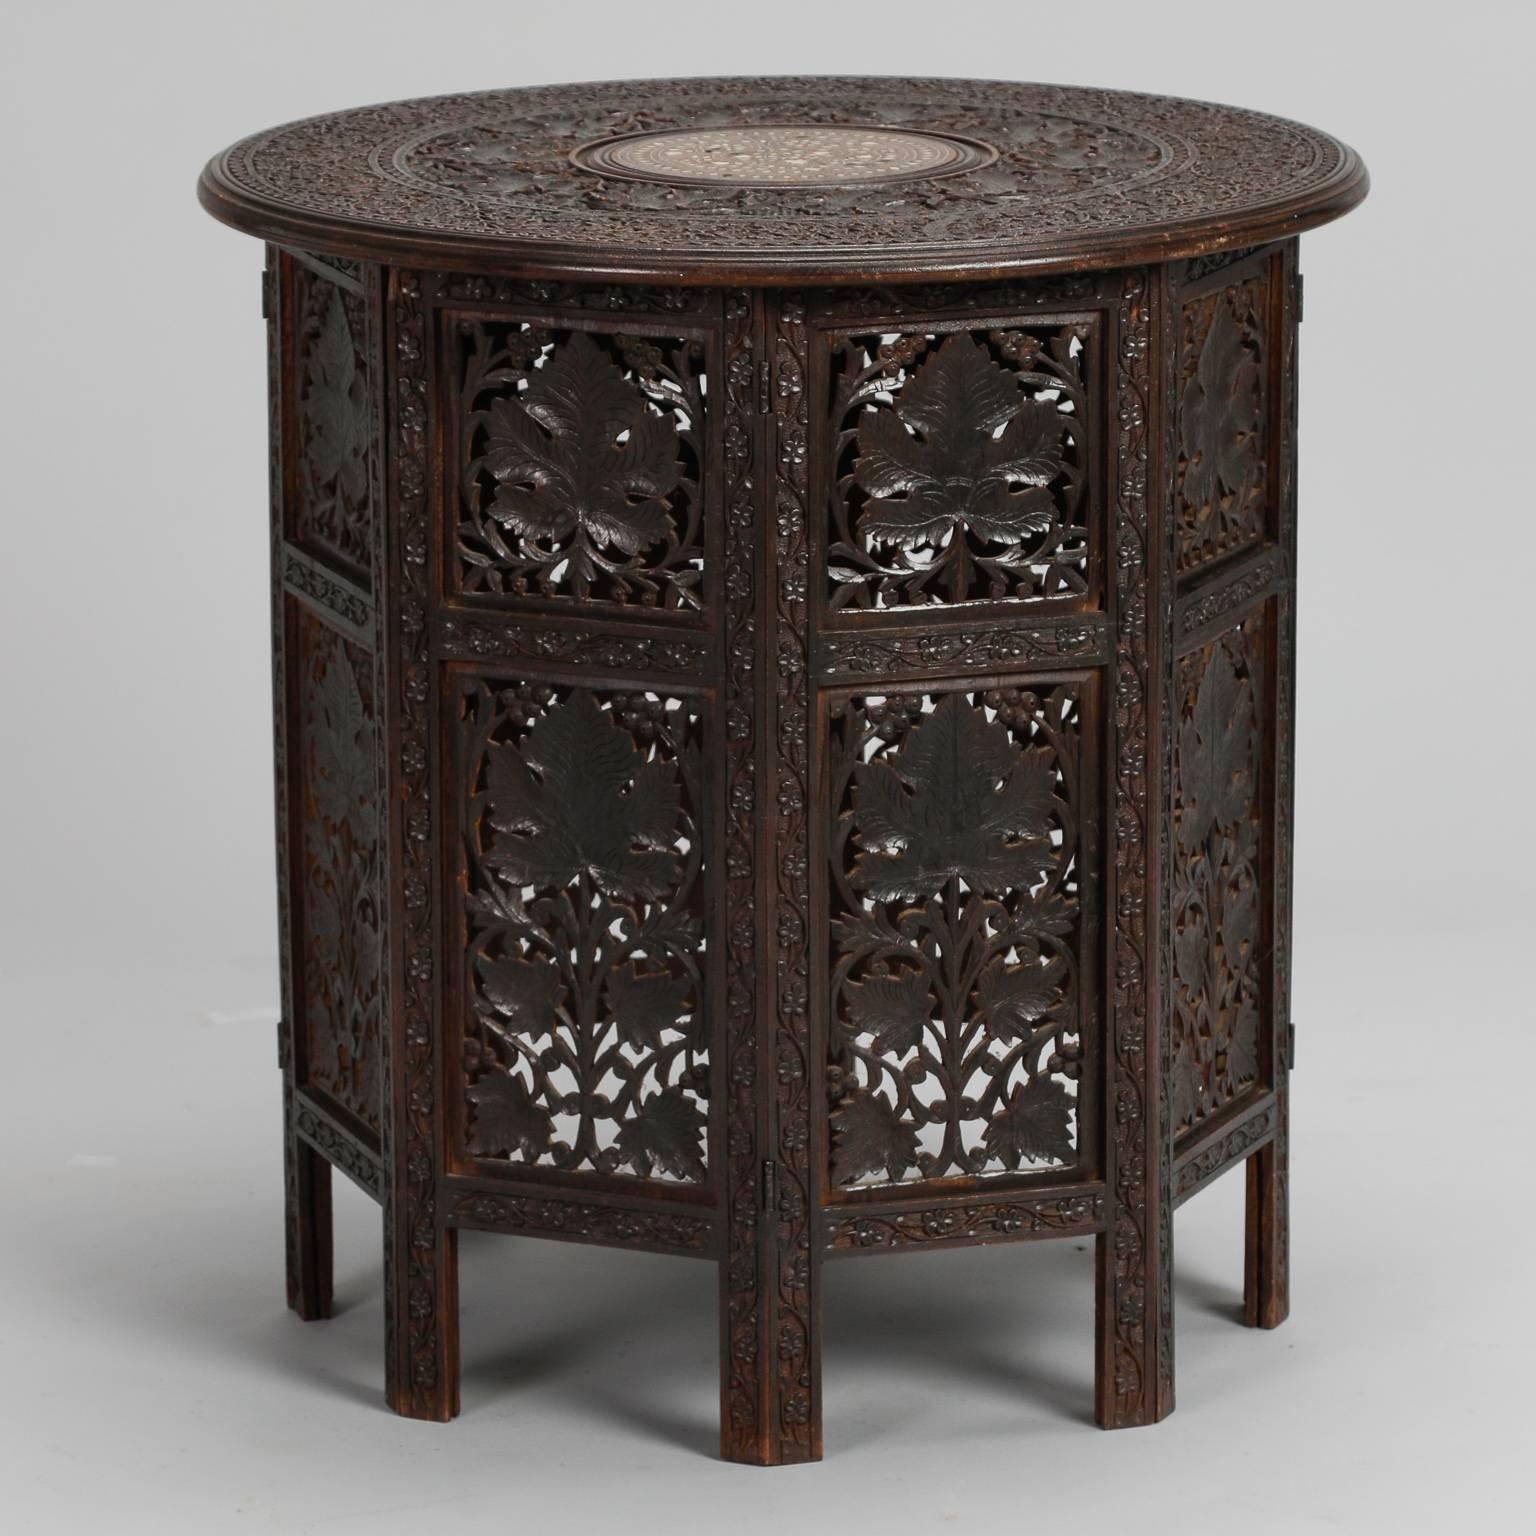 Dark wood side table is intricately carved with a design of leaves and vines, circa 1930s. Round top is removable and the base is made up of hinged panels that can be folded flat. Center of tabletop has a design of inlaid bone.